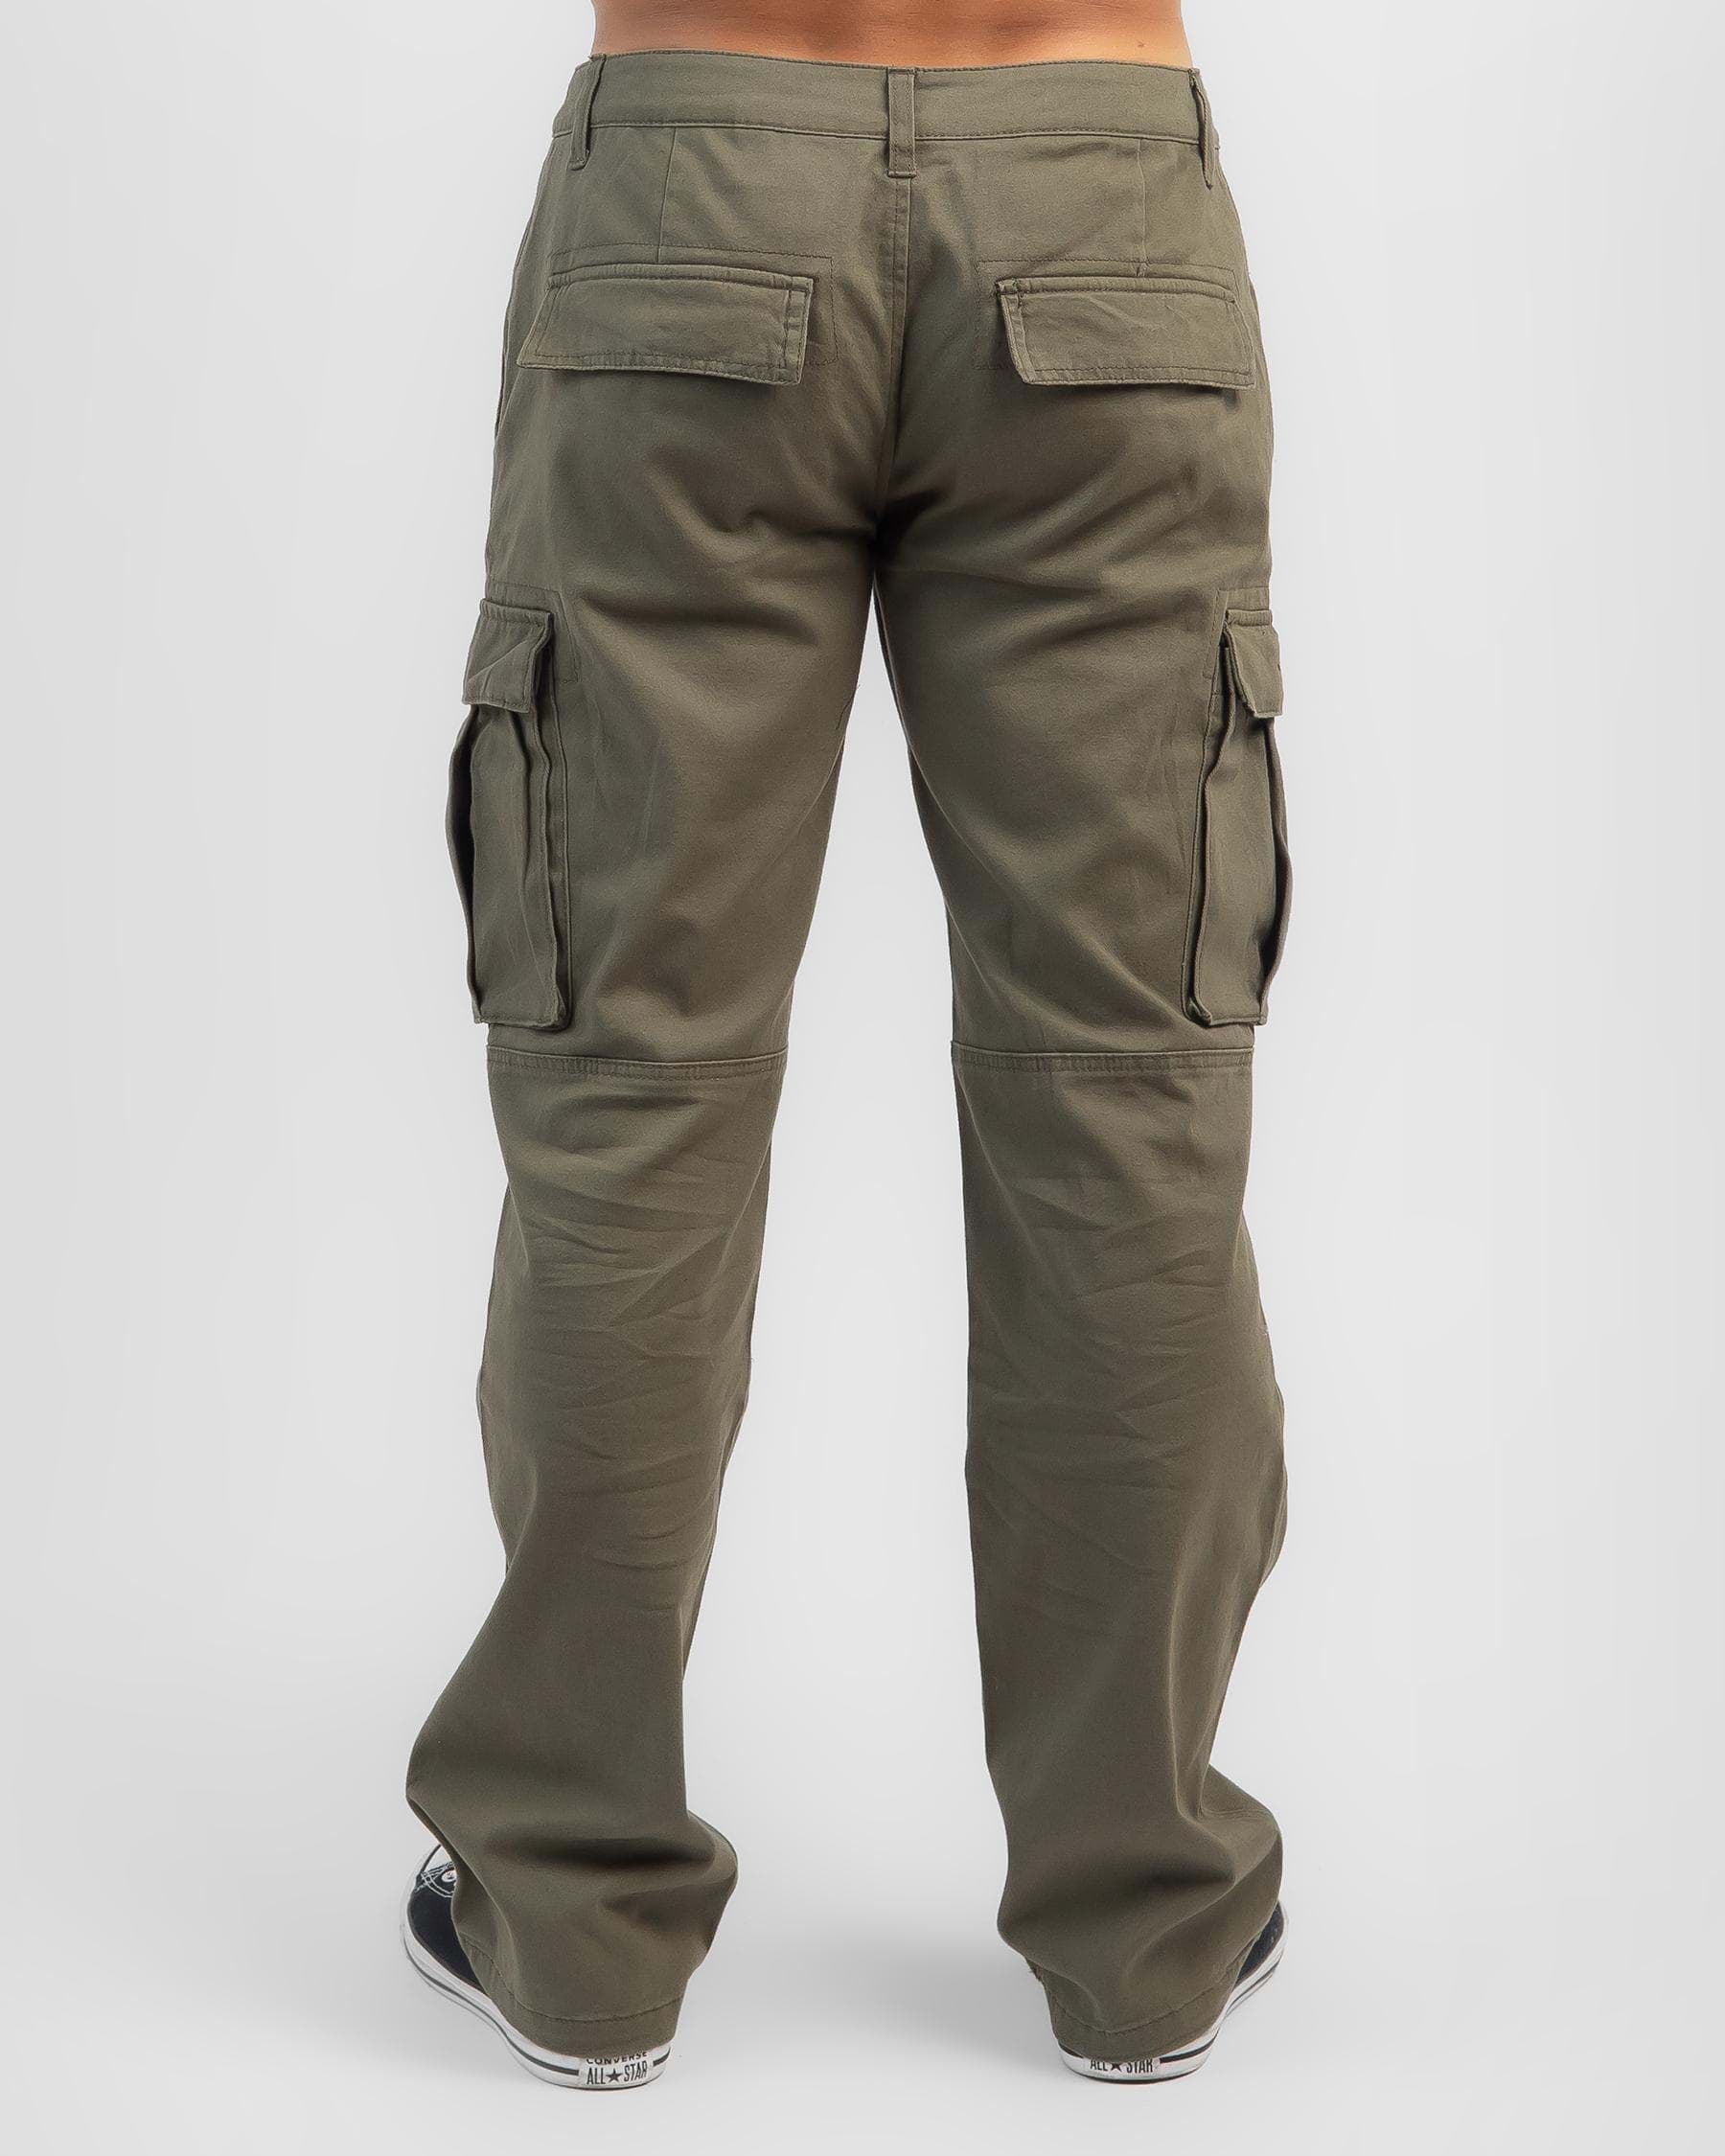 Shop Jacks Urban Pants In Washed Green - Fast Shipping & Easy Returns ...